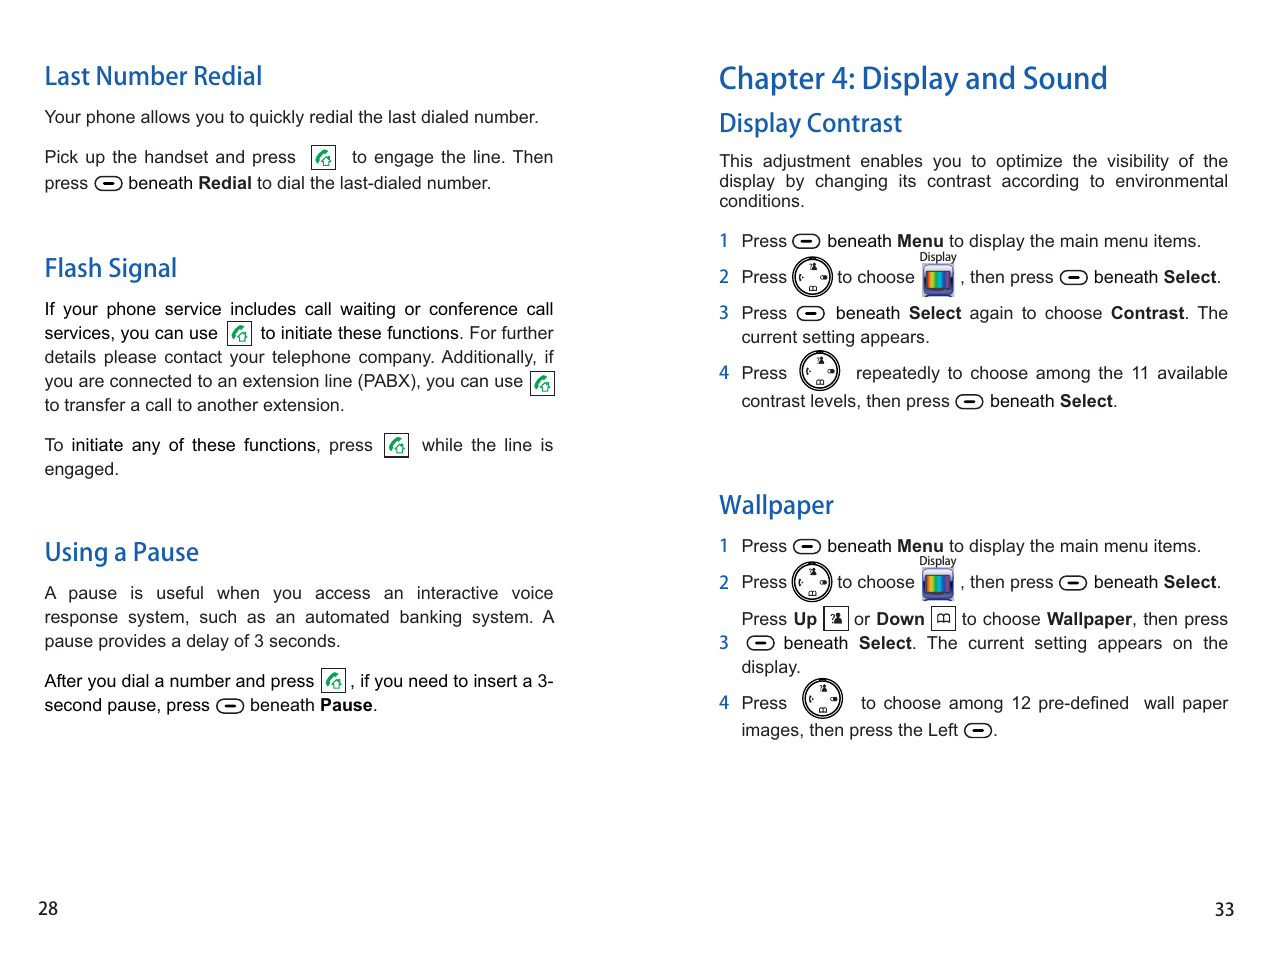 Chapter 4: display and sound, Display contrast wallpaper, Last number redial flash signal using a pause | iCreation G-700 user vanual User Manual | Page 29 / 62